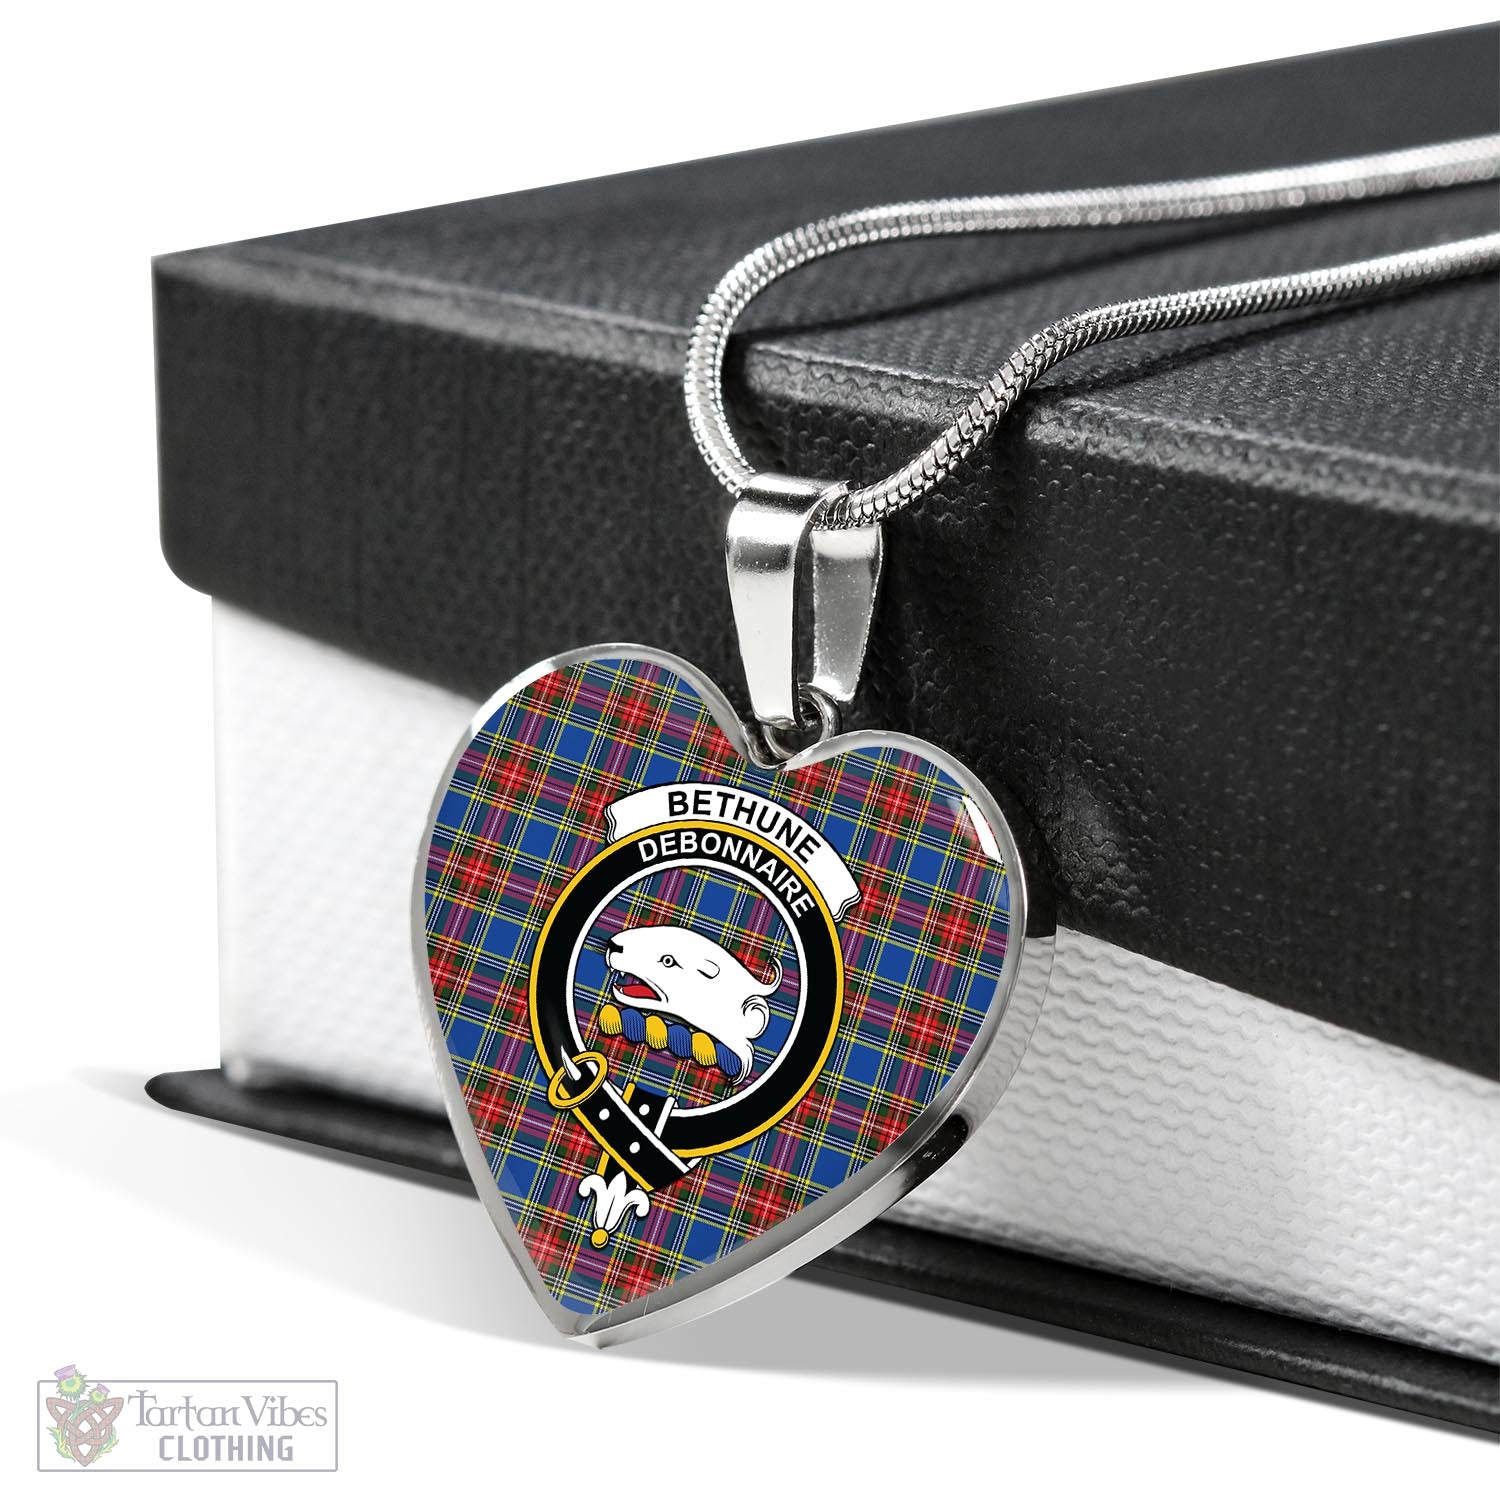 Tartan Vibes Clothing Bethune Tartan Heart Necklace with Family Crest